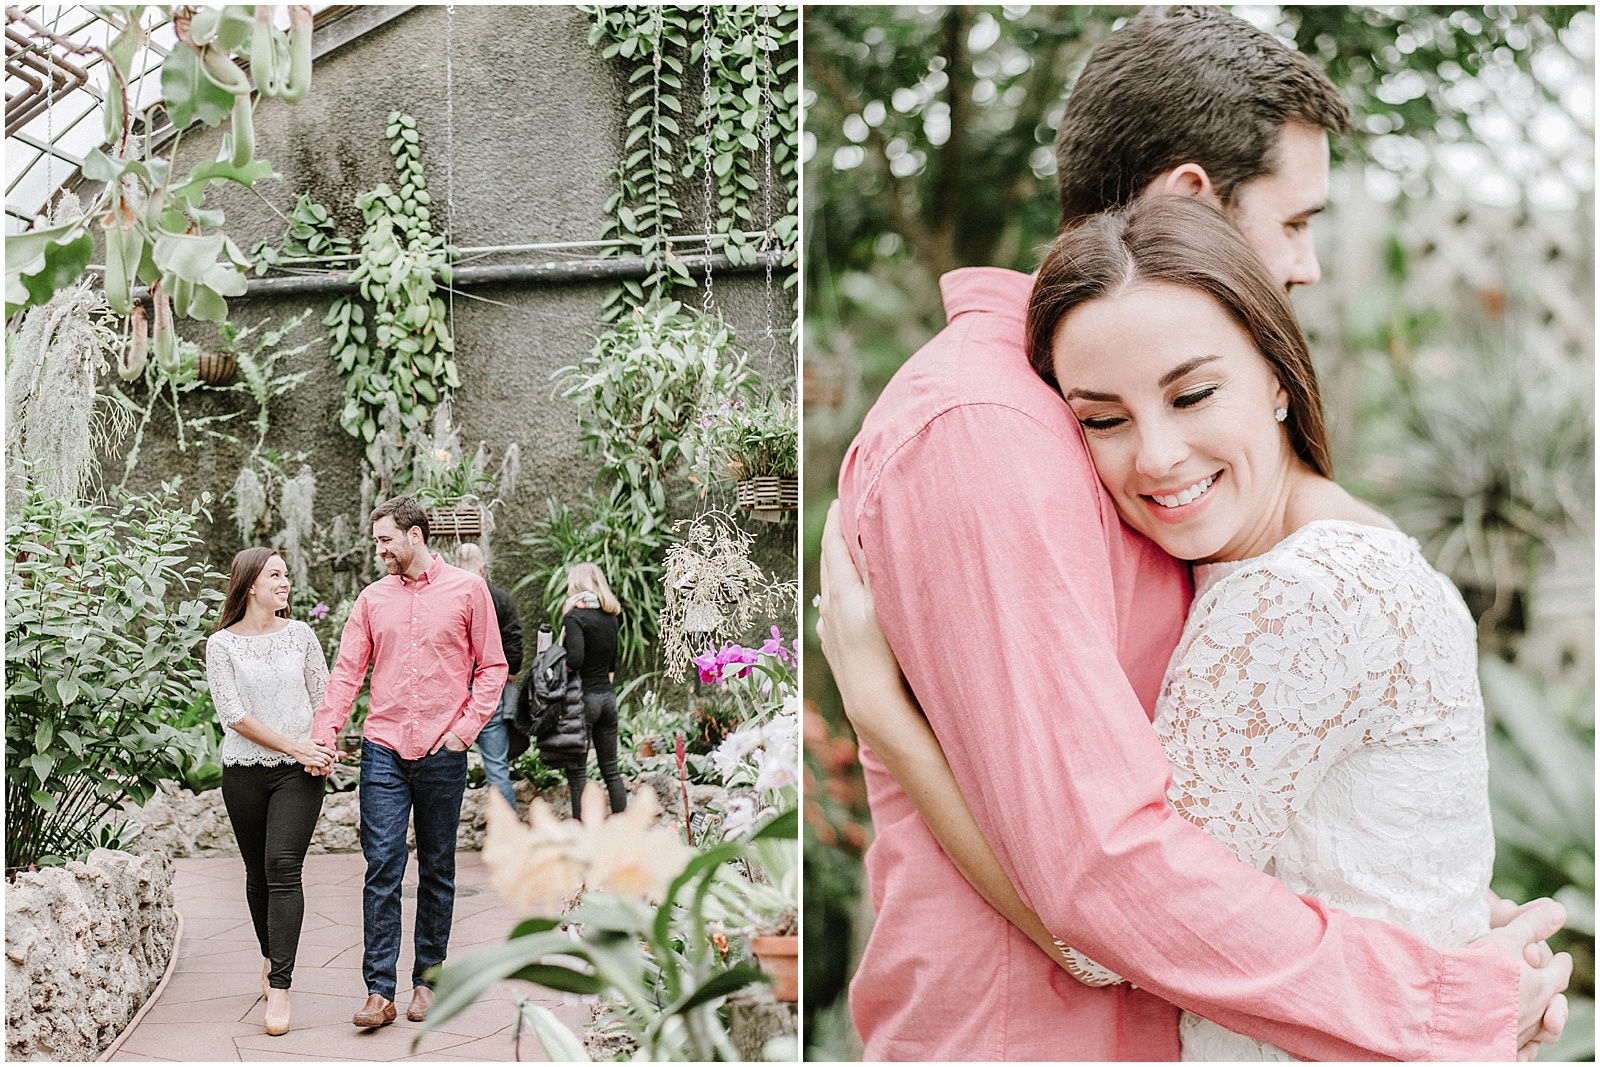 Greenhouse engagement photos at Lincoln Park Conservatory